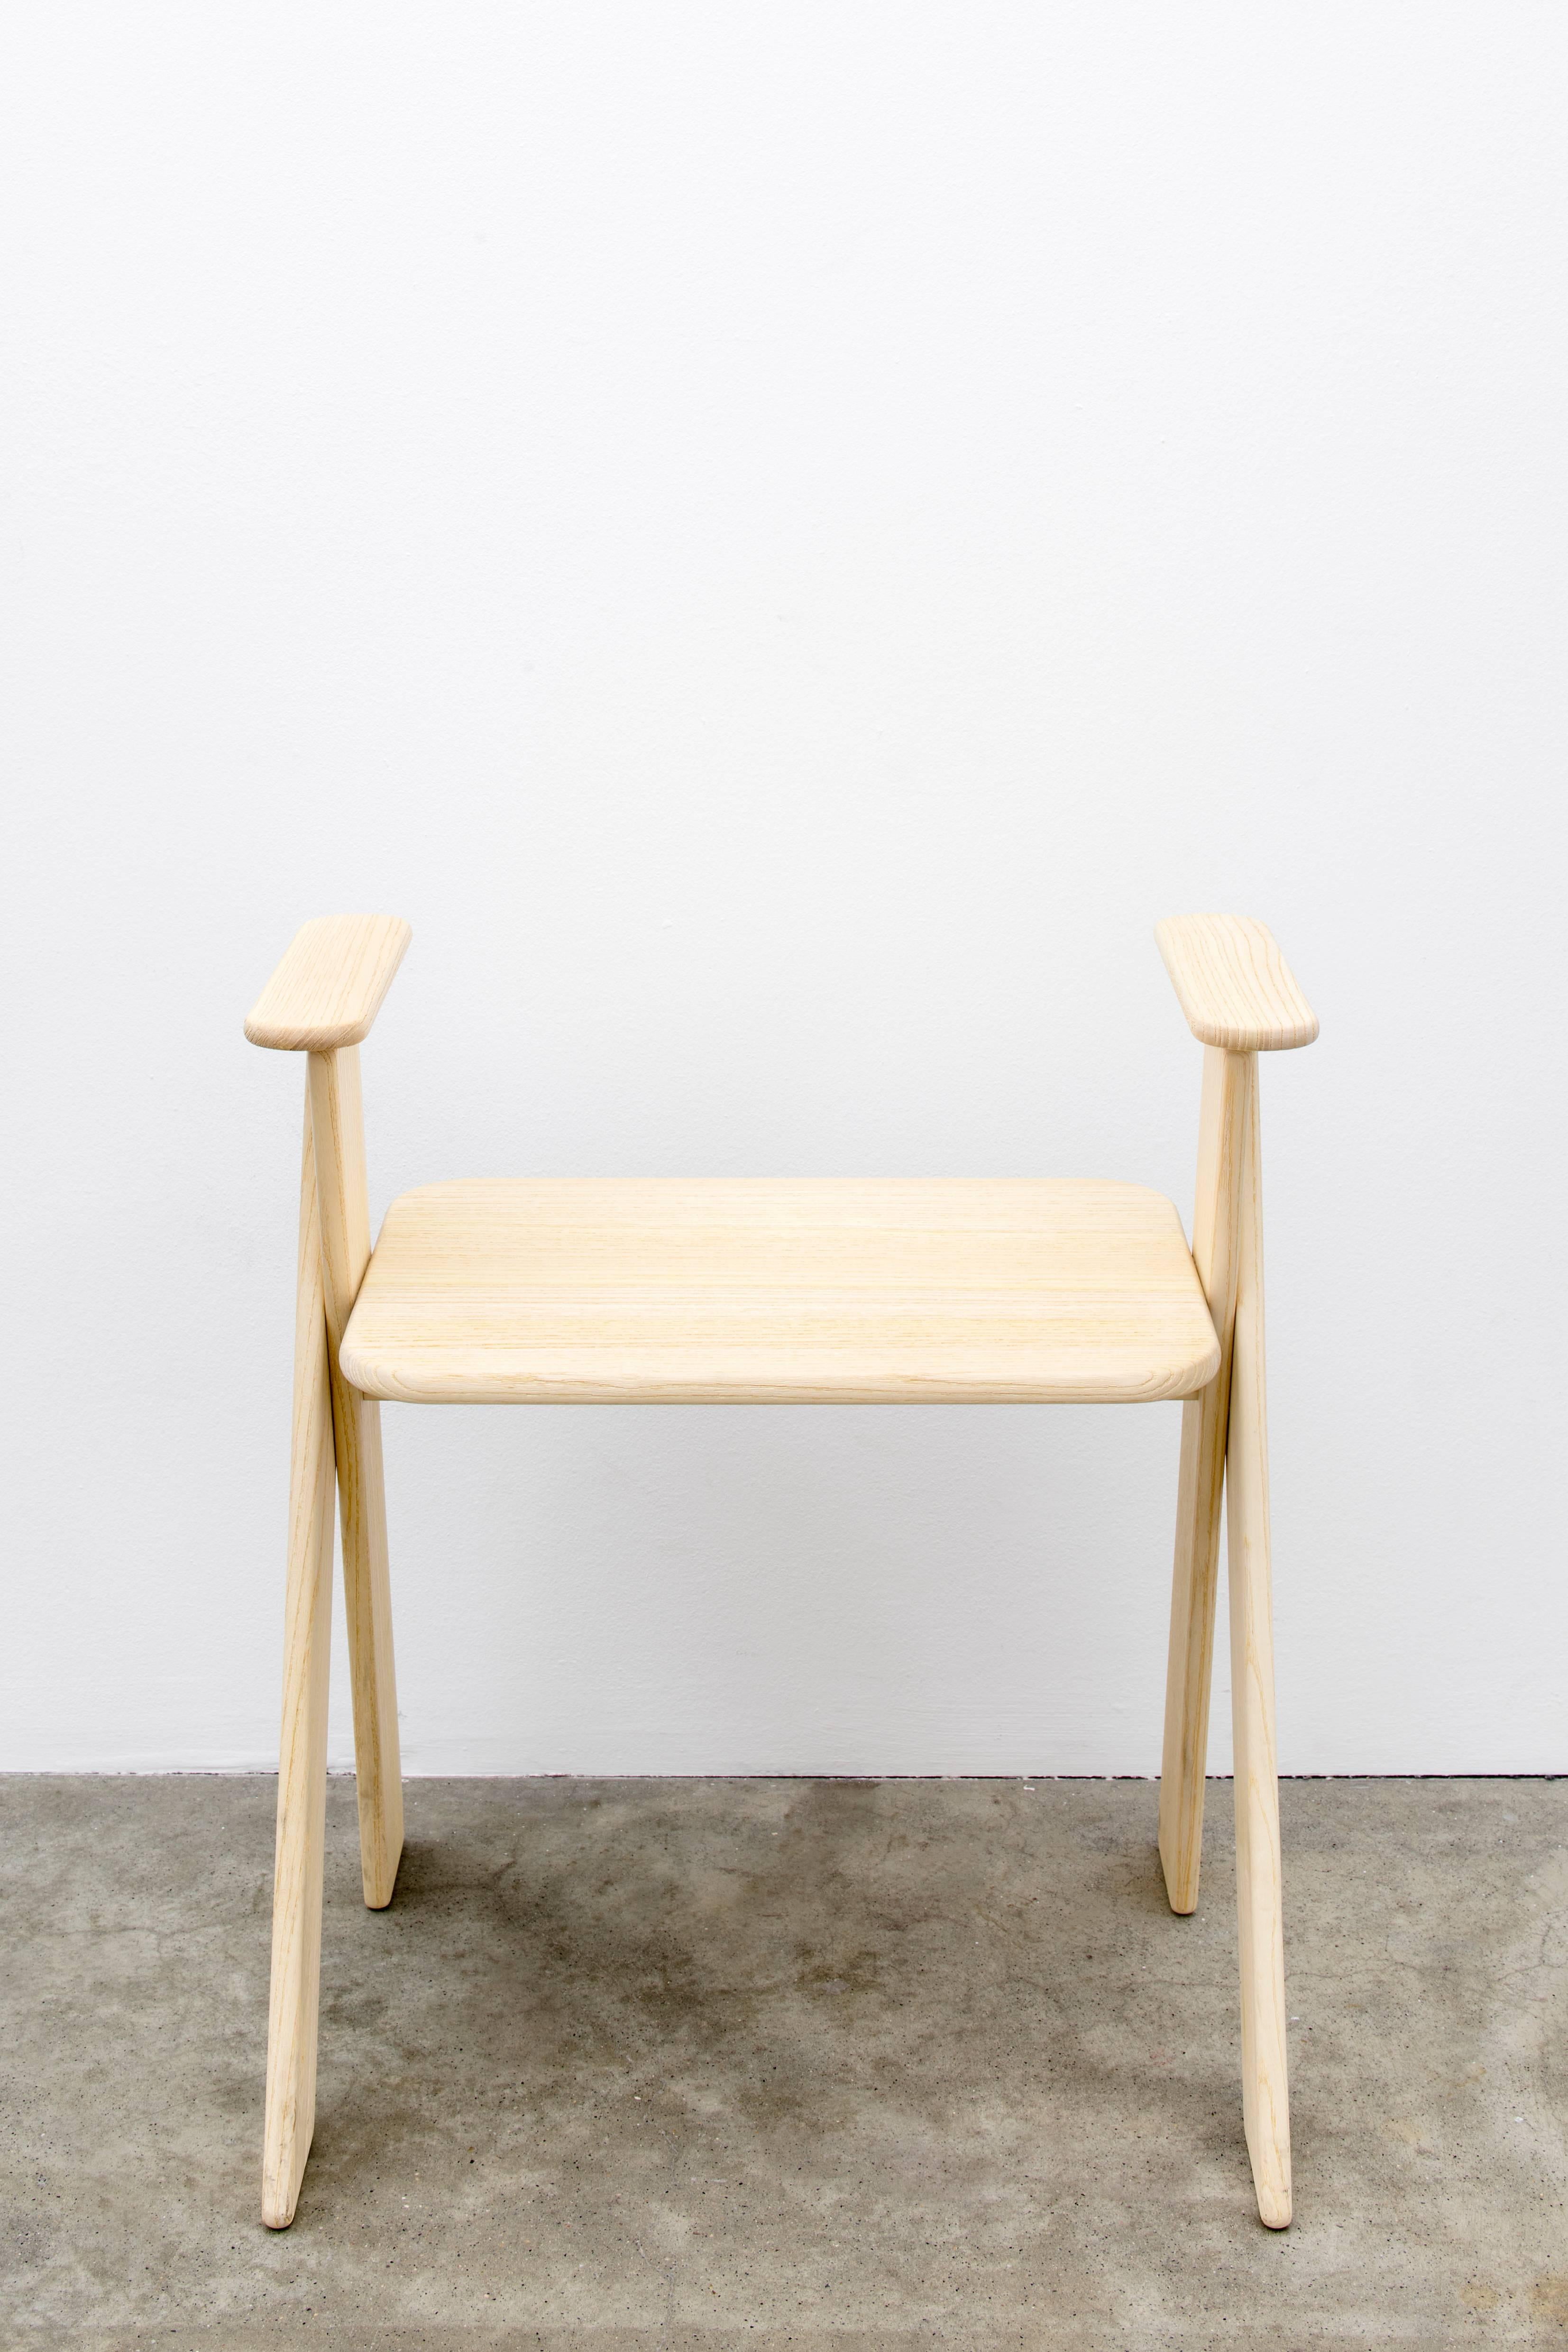 Stool or chair

“A stool that asks for a wall to become upgraded to a chair.”

This piece was originally designed for the 